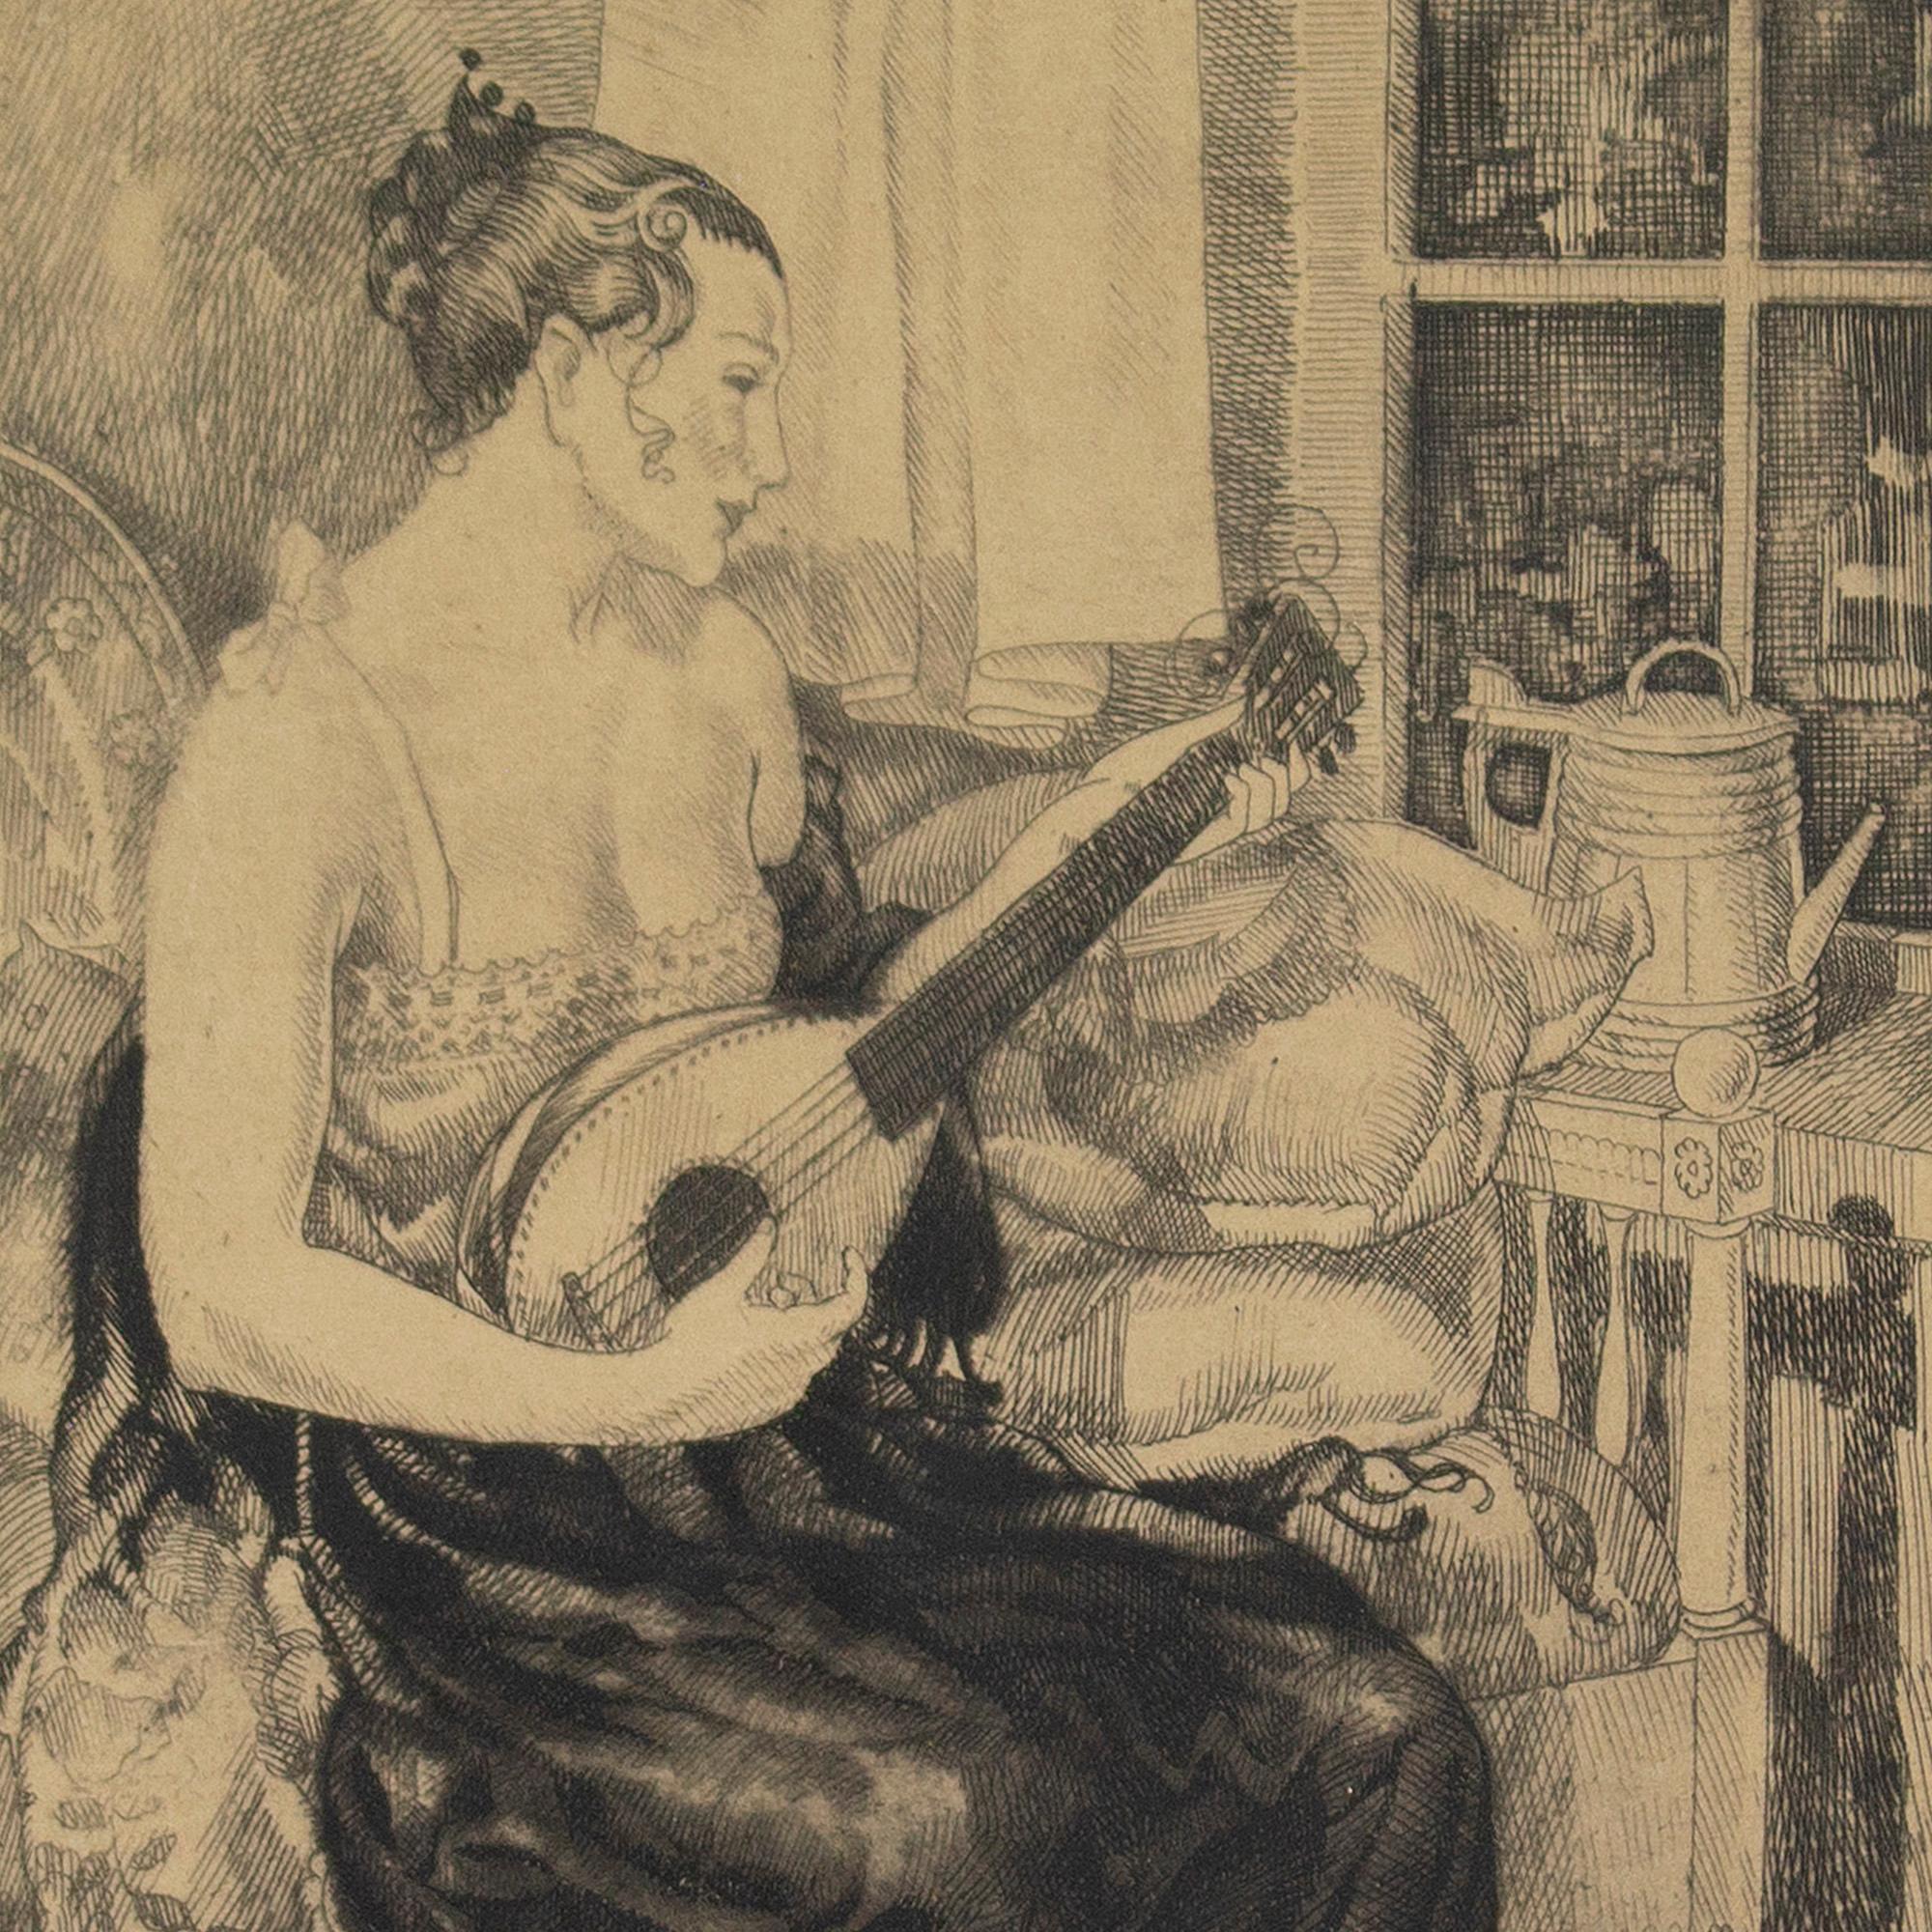 This exquisite early 20th-century etching by Swedish artist Axel Wallert (1890-1962) depicts a seated woman playing the mandolin. It’s brimming with style yet captured with sensitivity.

Given the relative level of intimacy, it’s plausible that the